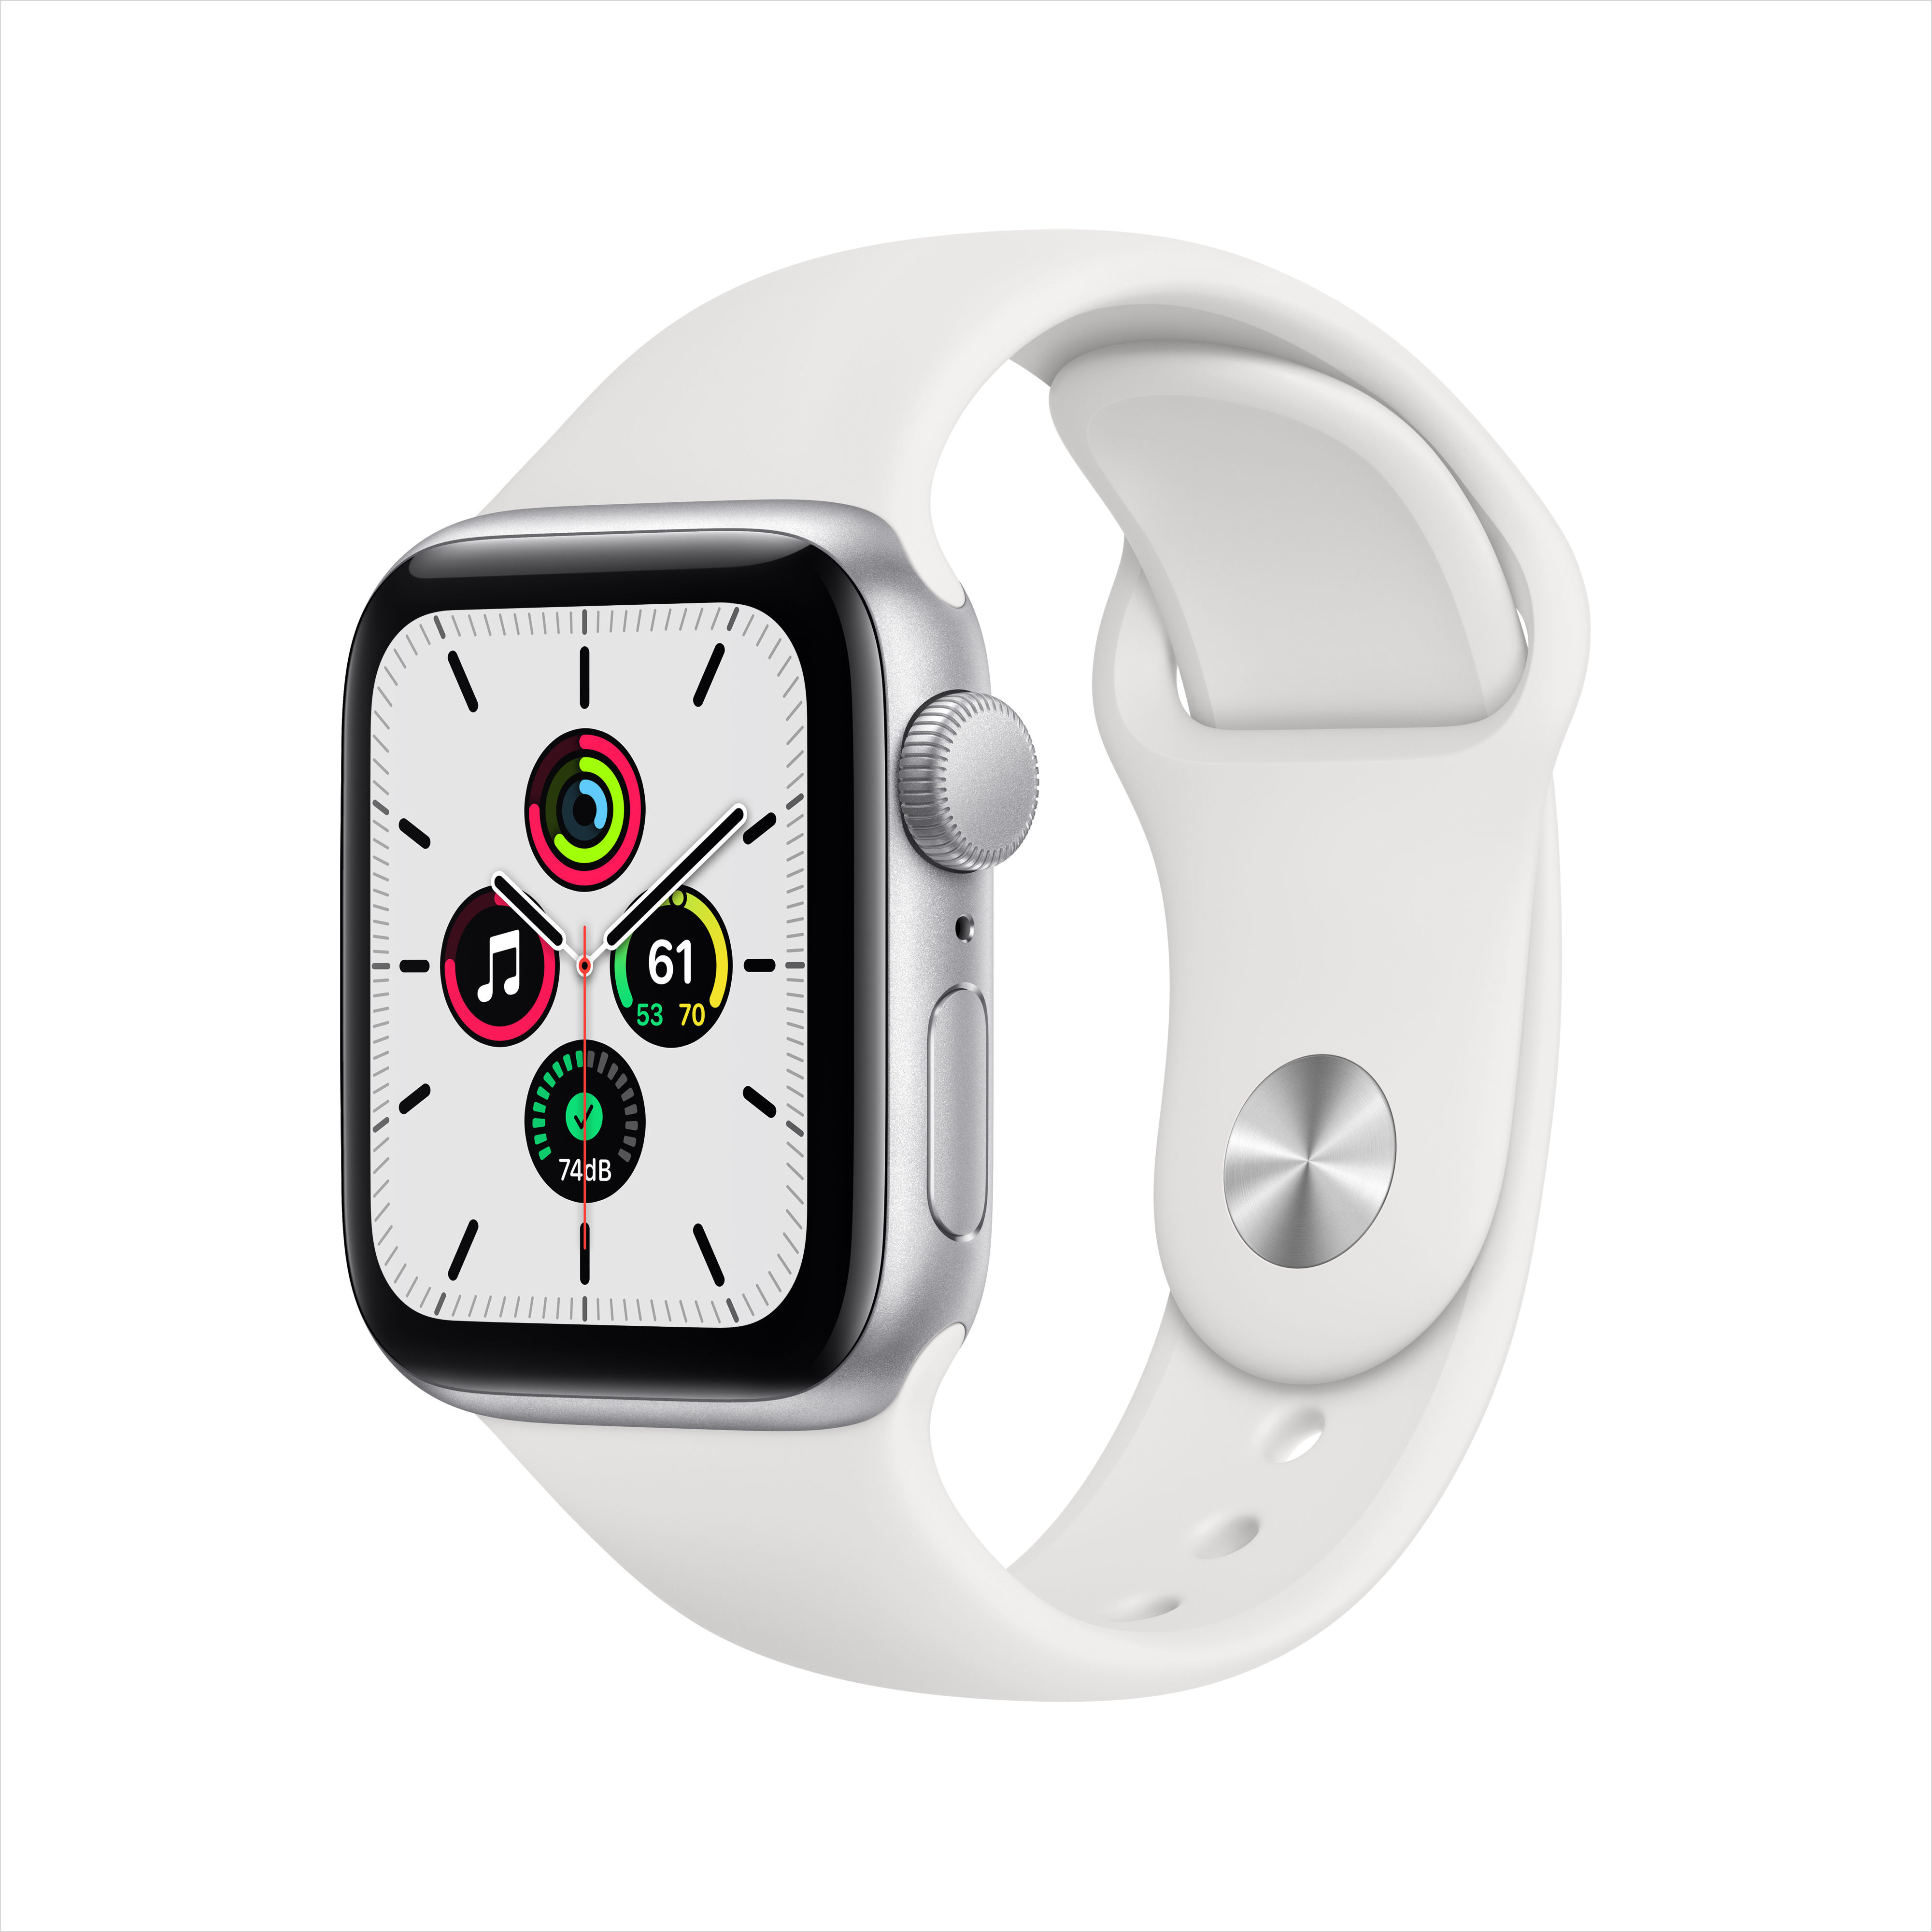 Apple Watch SE (1st Gen) GPS, 40mm Silver Aluminum Case with White Sport Band - Regular - image 1 of 9